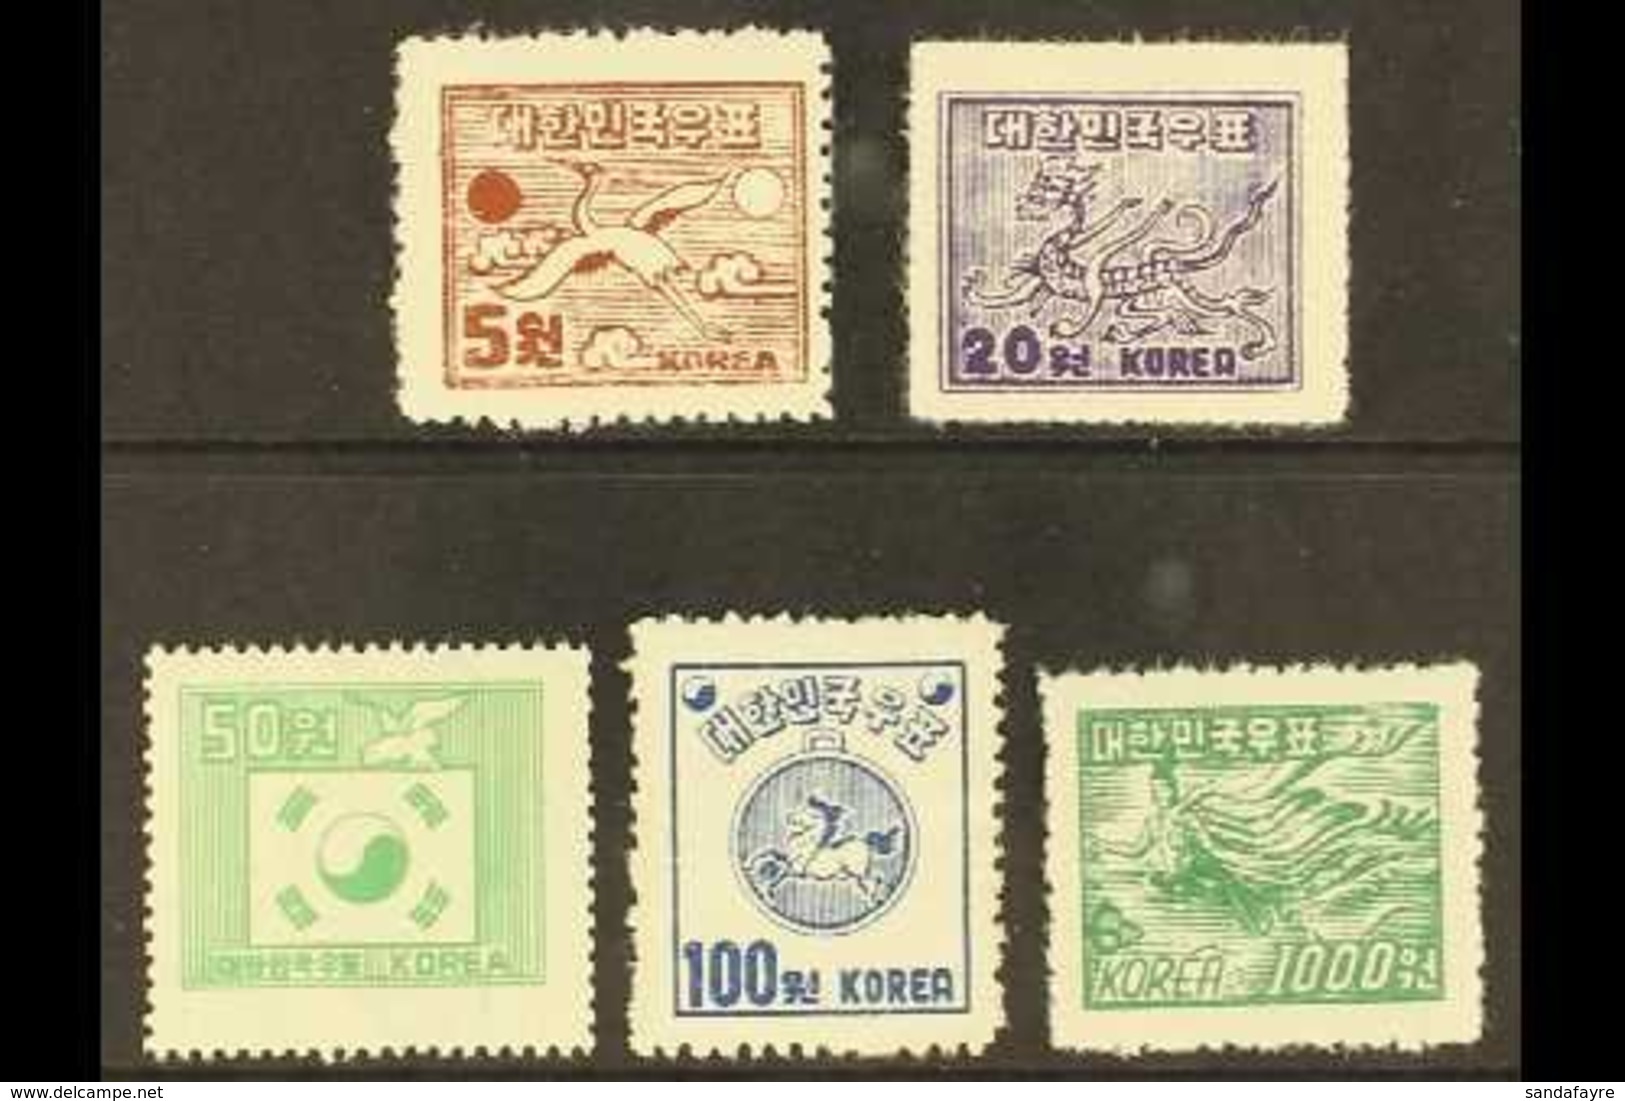 1951 Defins Set, 20w Rouletted, Others Perforated, SG 140/4, 5w & 20w No Gum As Issued, Others Very Fine Mint (5 Stamps) - Korea, South